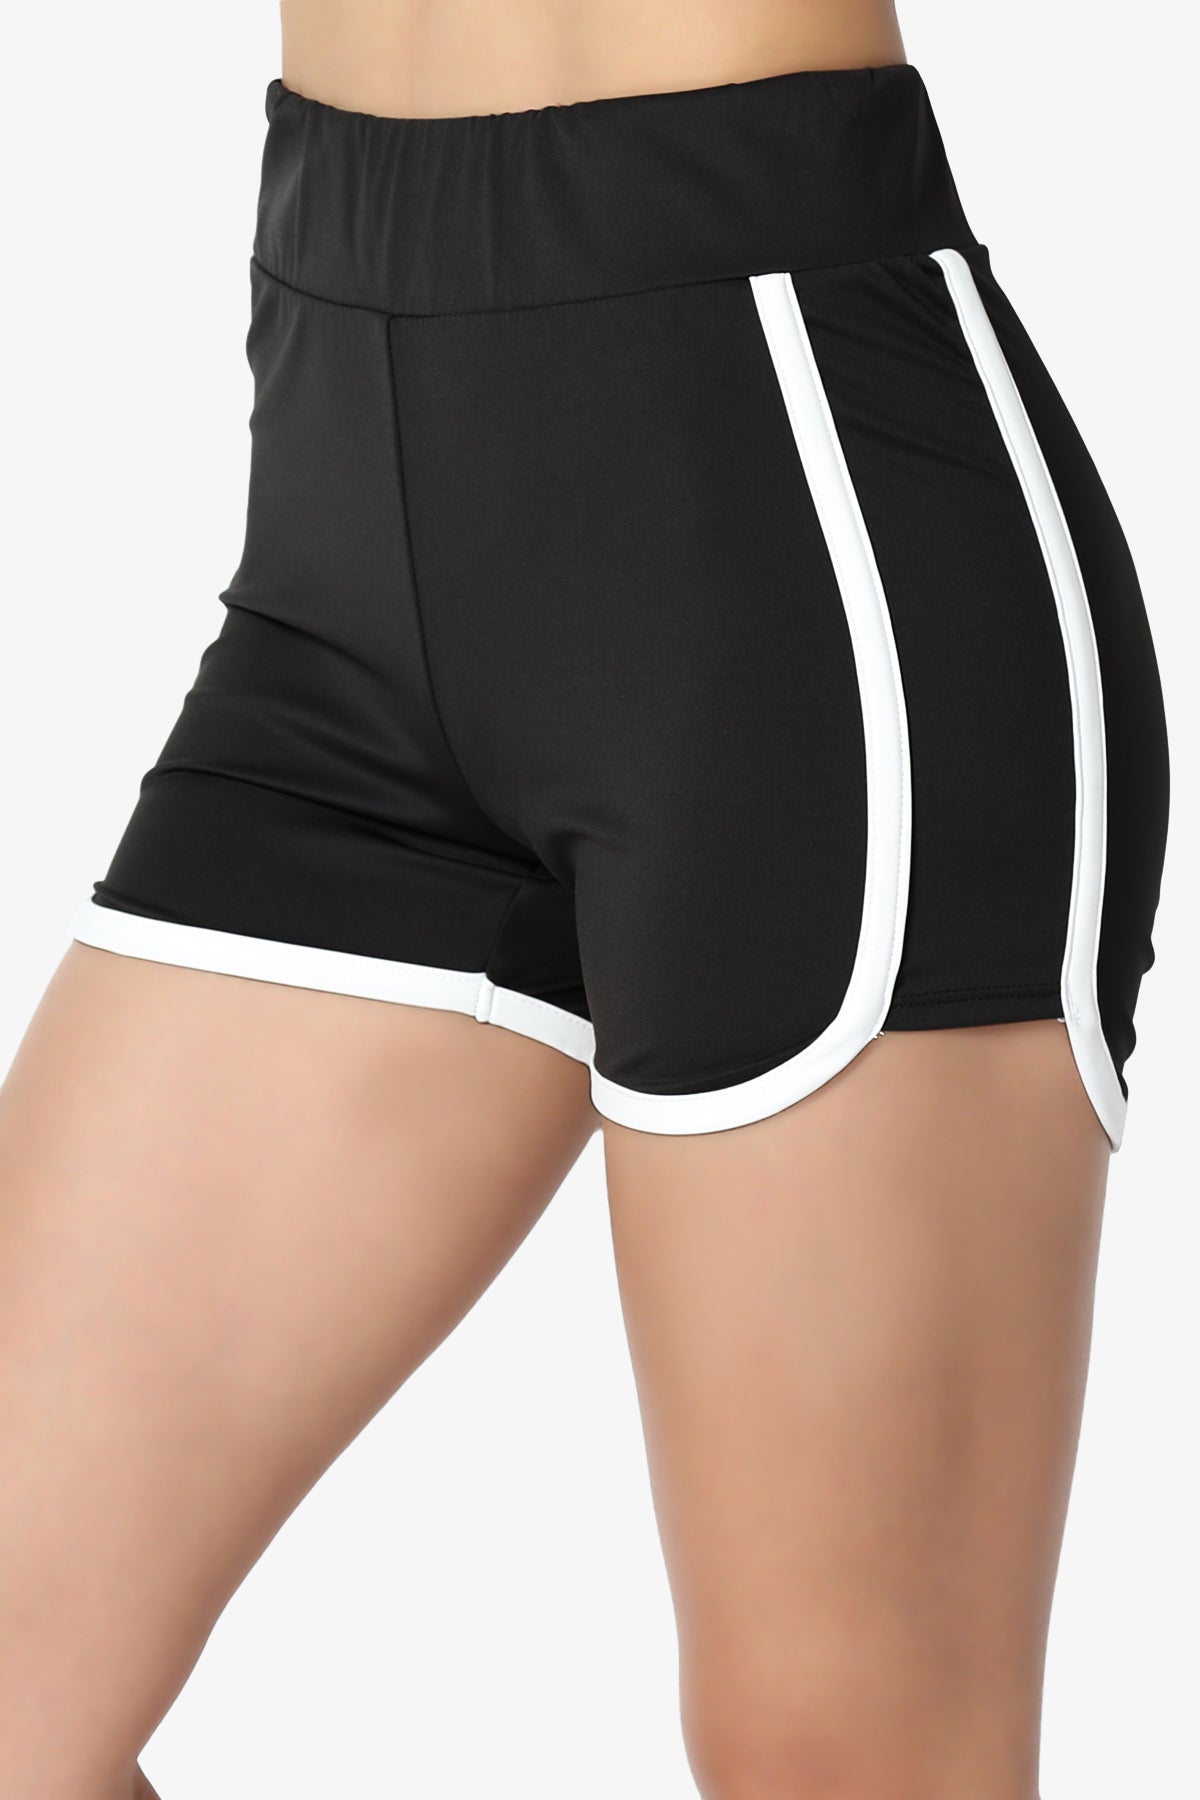 Load image into Gallery viewer, Dovie Athletic Contrast Trim Dolpin Shorts
